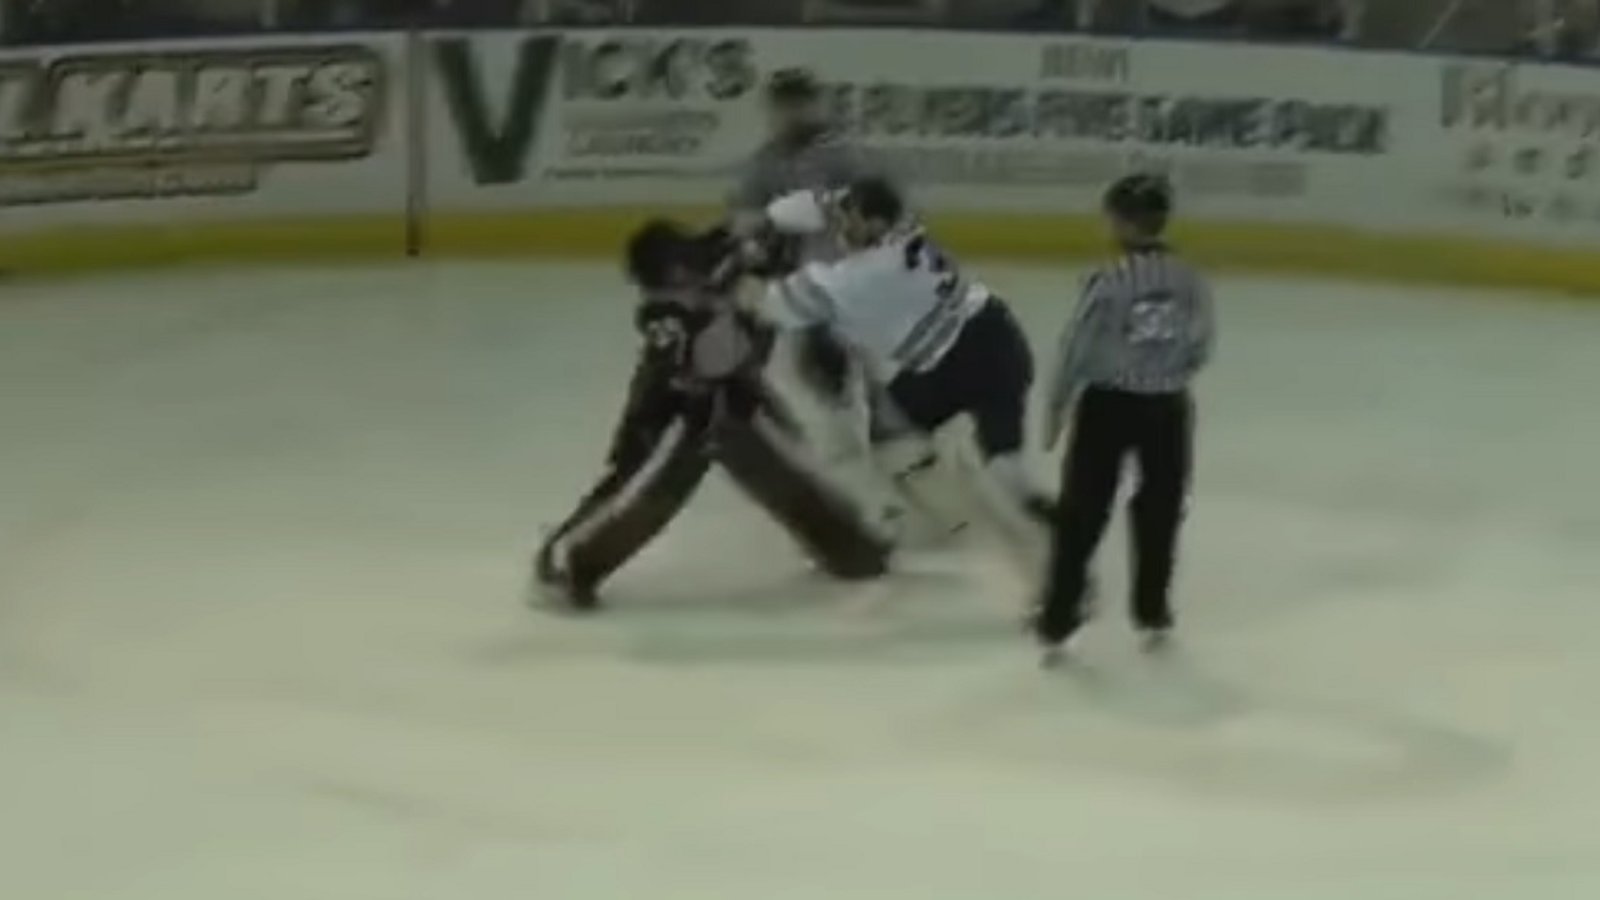 Two goalies throw down after a stoppage in play.